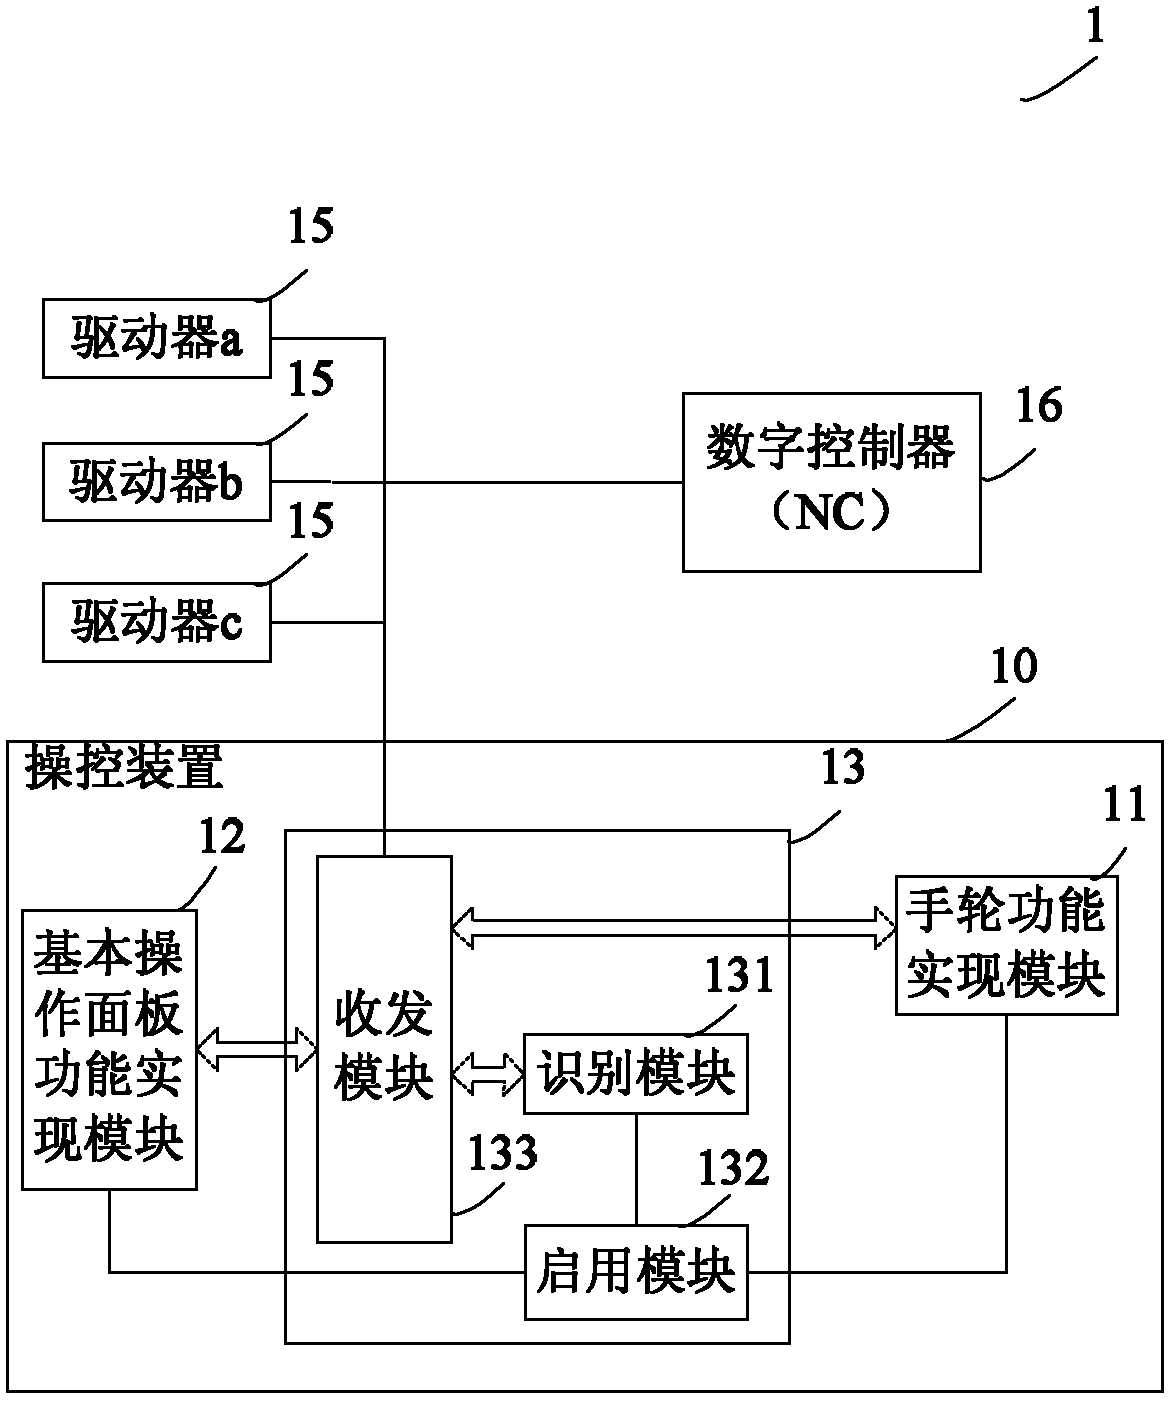 Control device for machine tool system and machine tool system